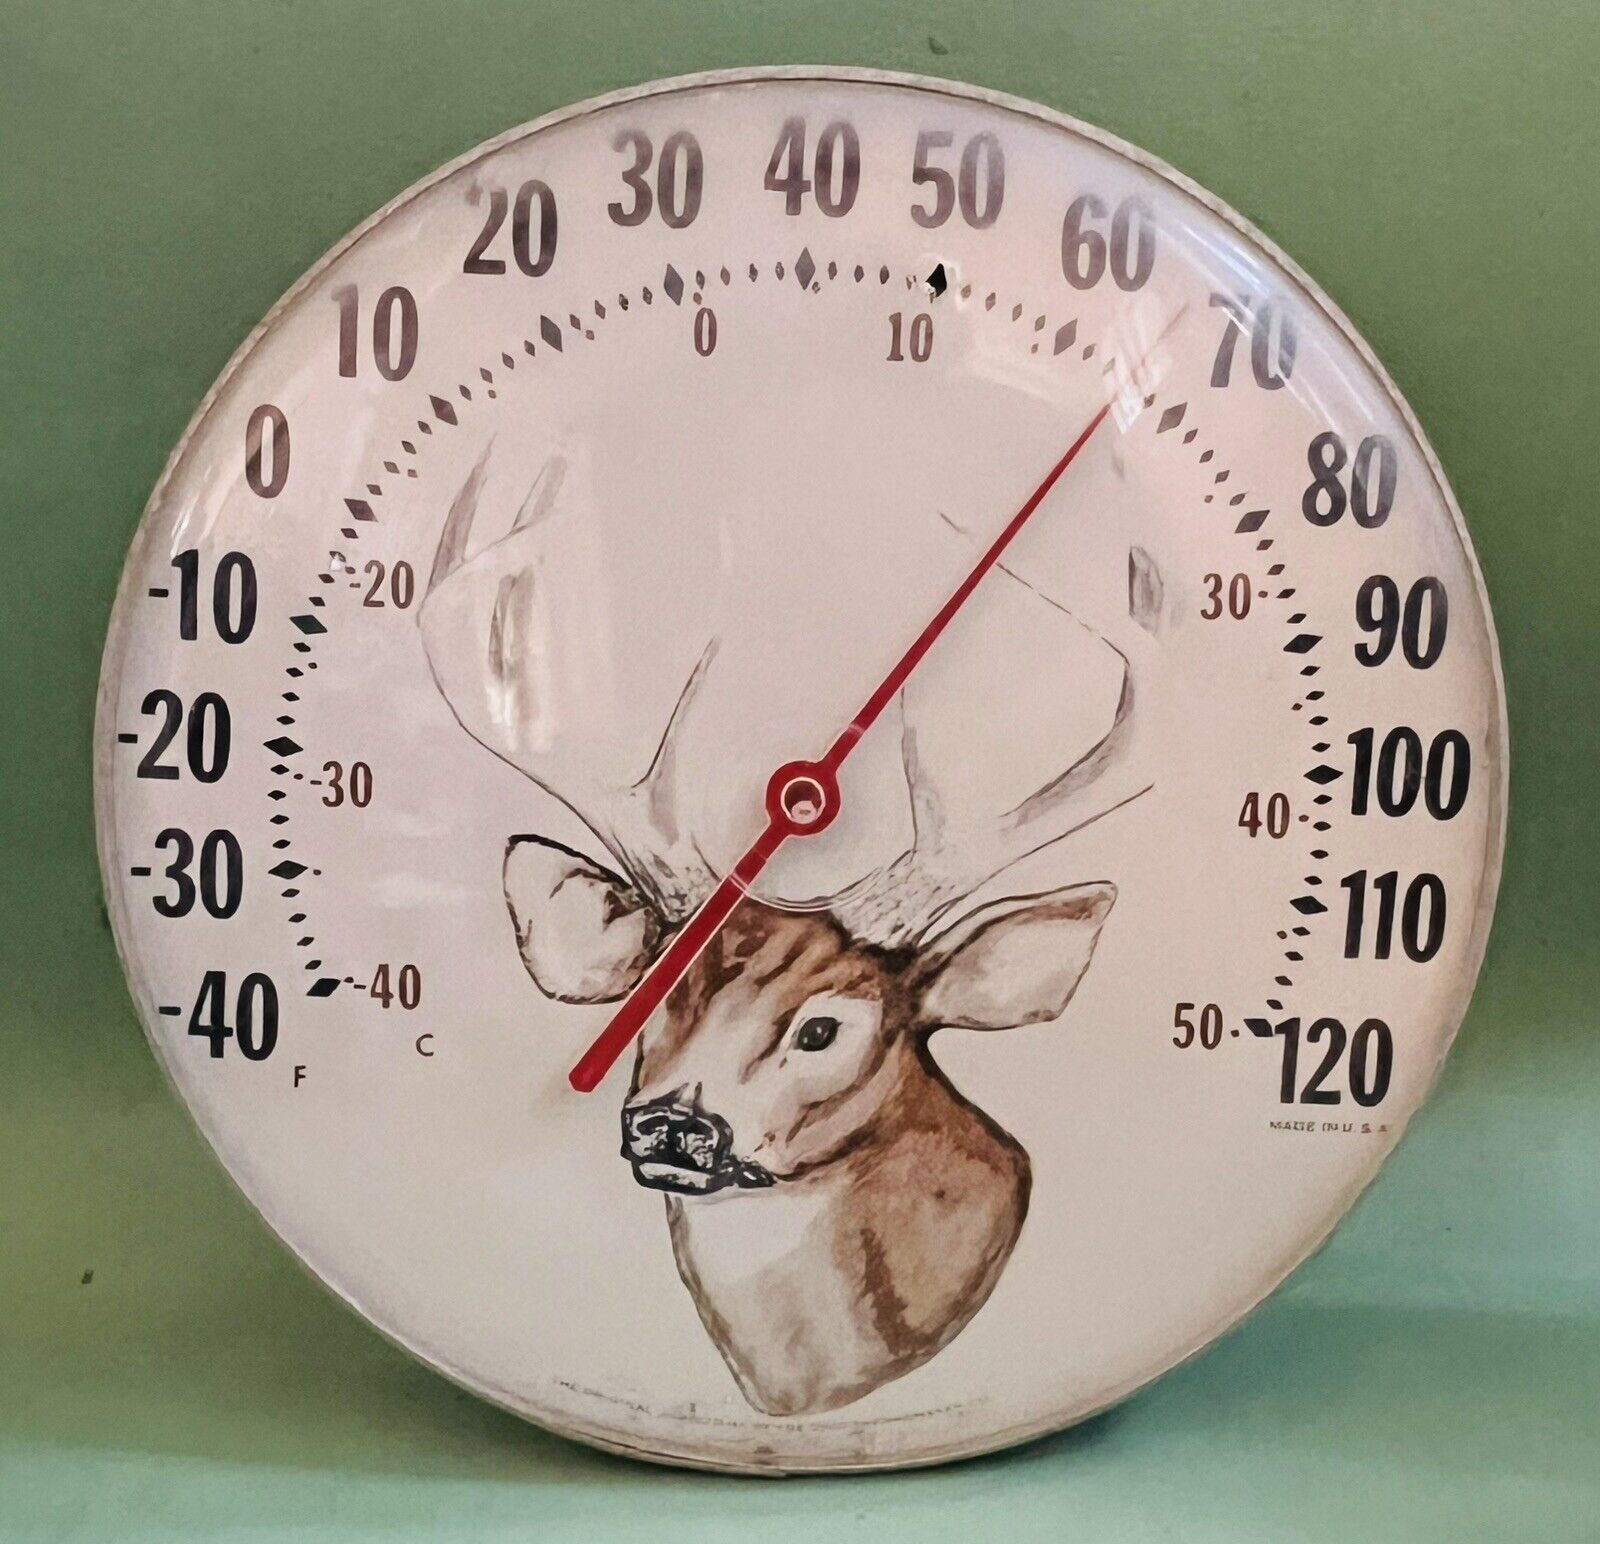 Vintage The Original Jumbo Dial Thermometer, Deer Head, Ohio Thermometer Co.